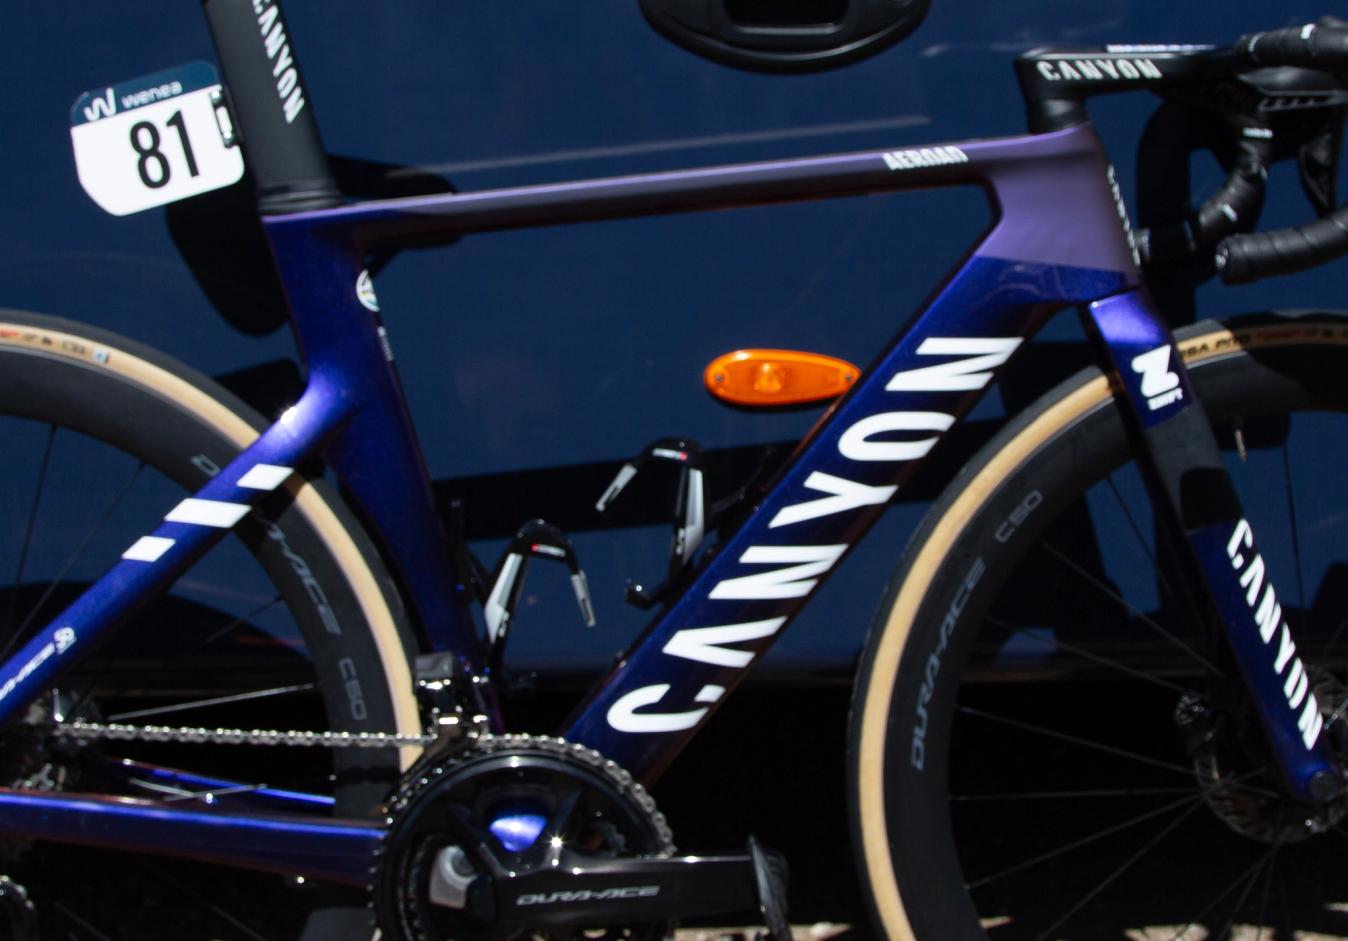 The blue and purple colourway of Alpecin-Deceuninck's Canyon Aeroad